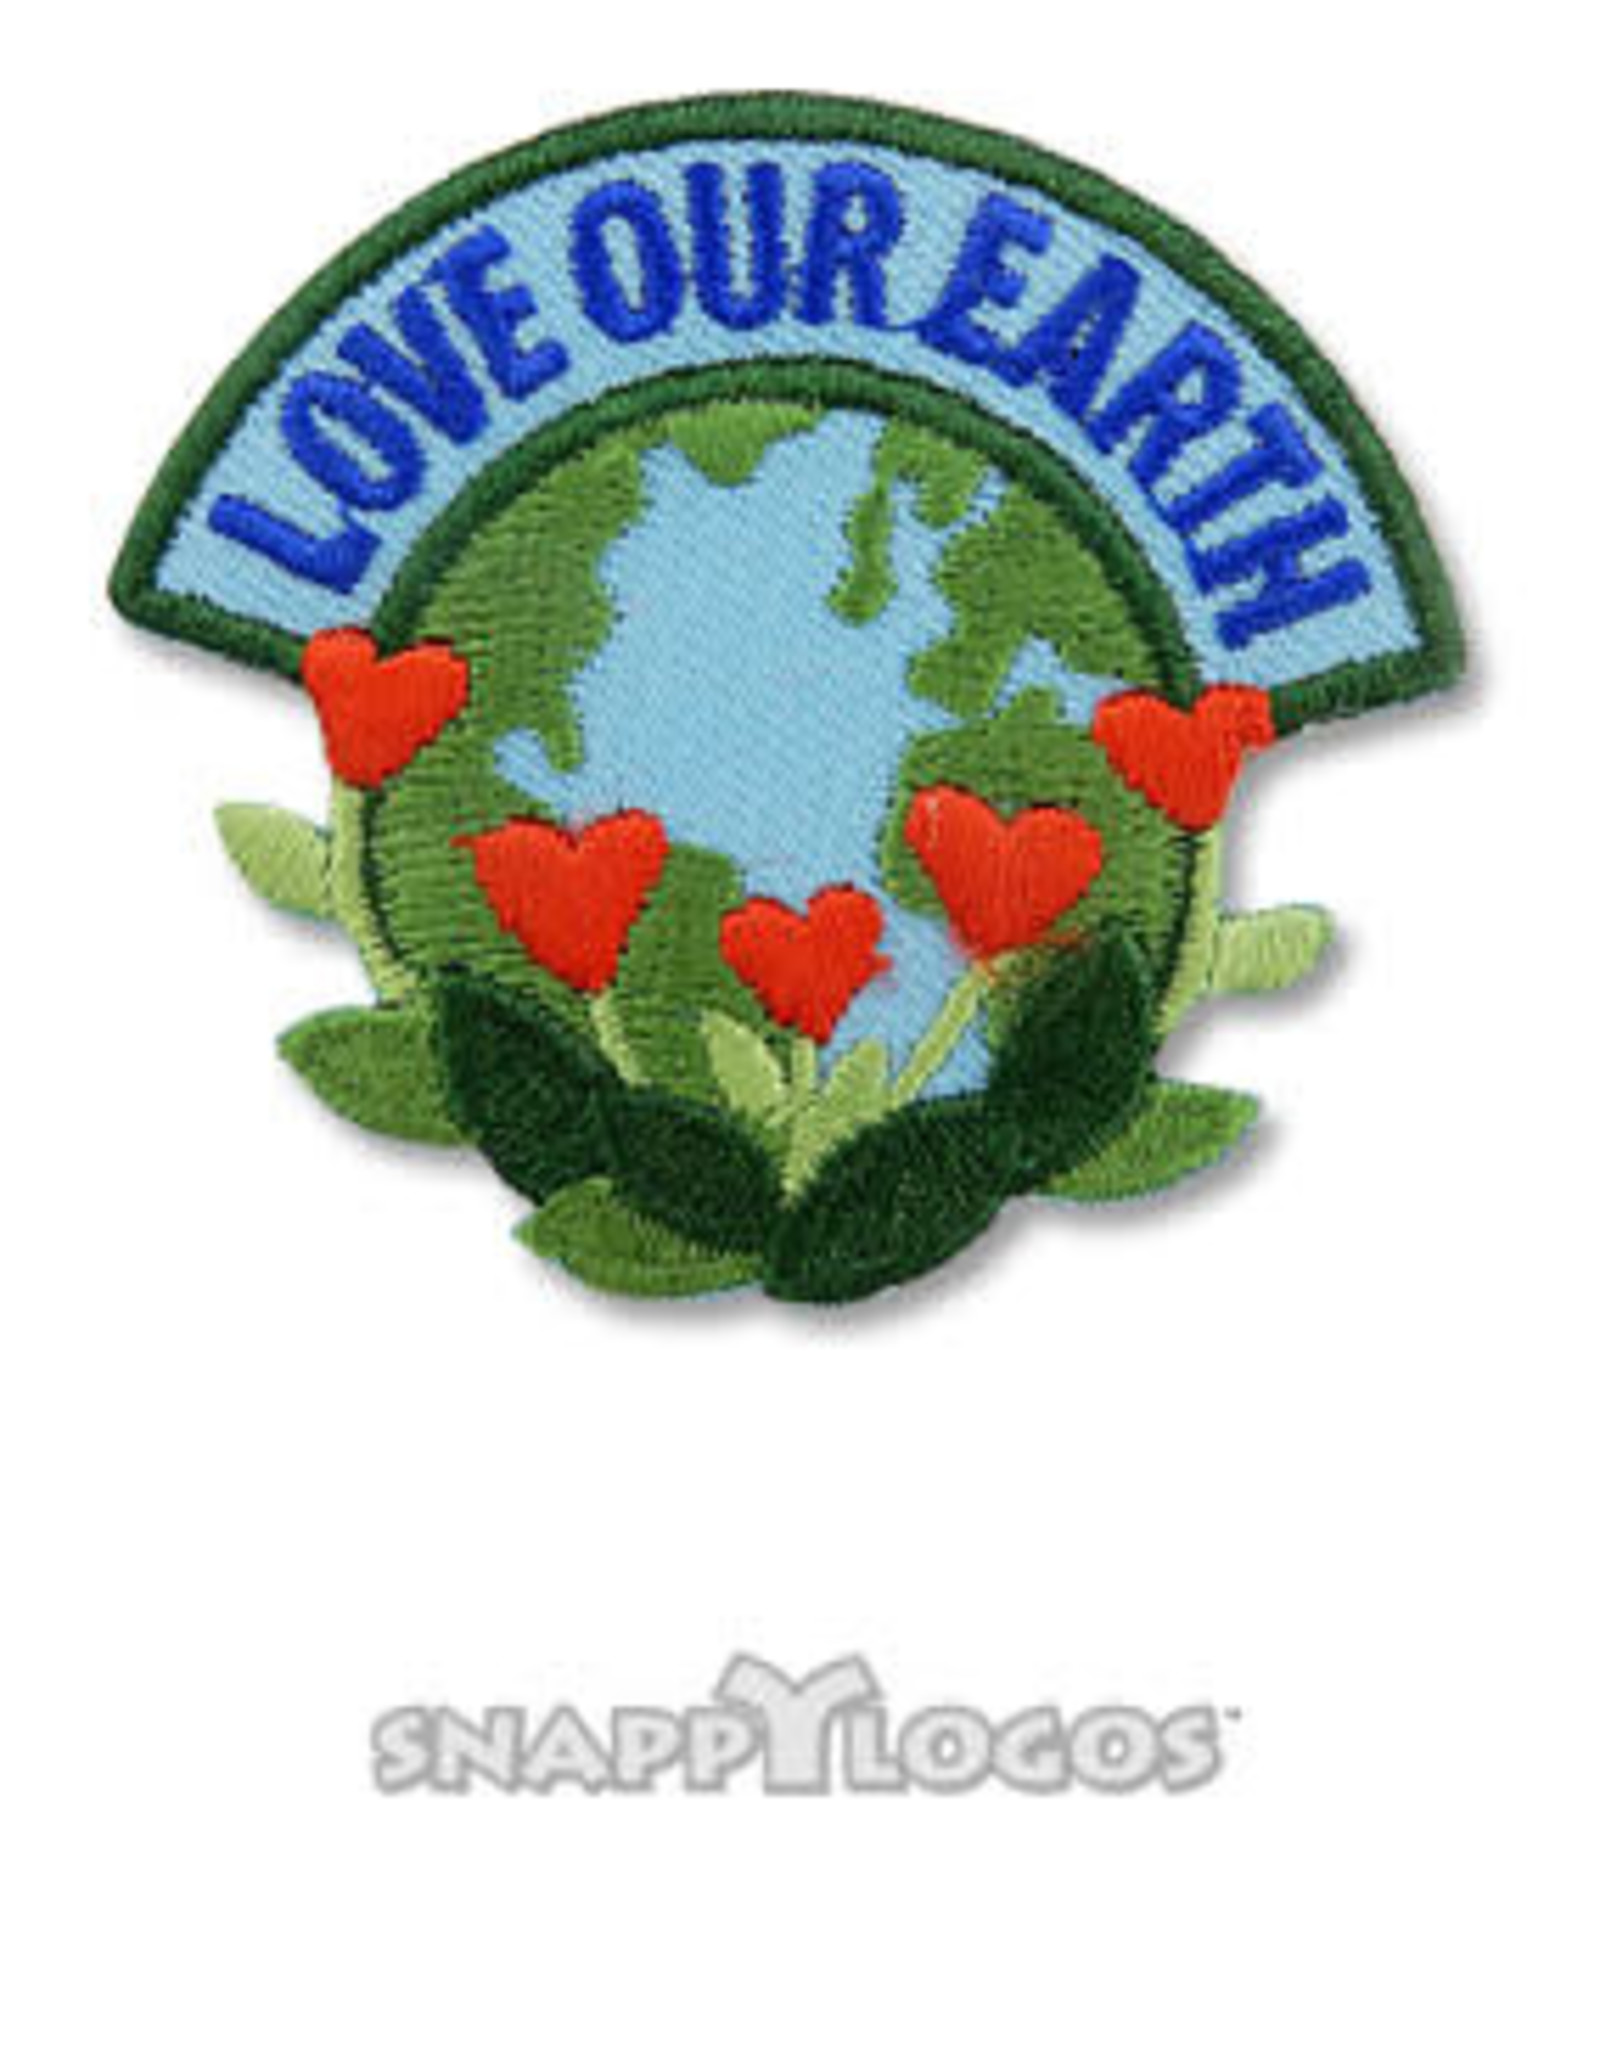 snappylogos Love Our Earth Fun Patch (6620)